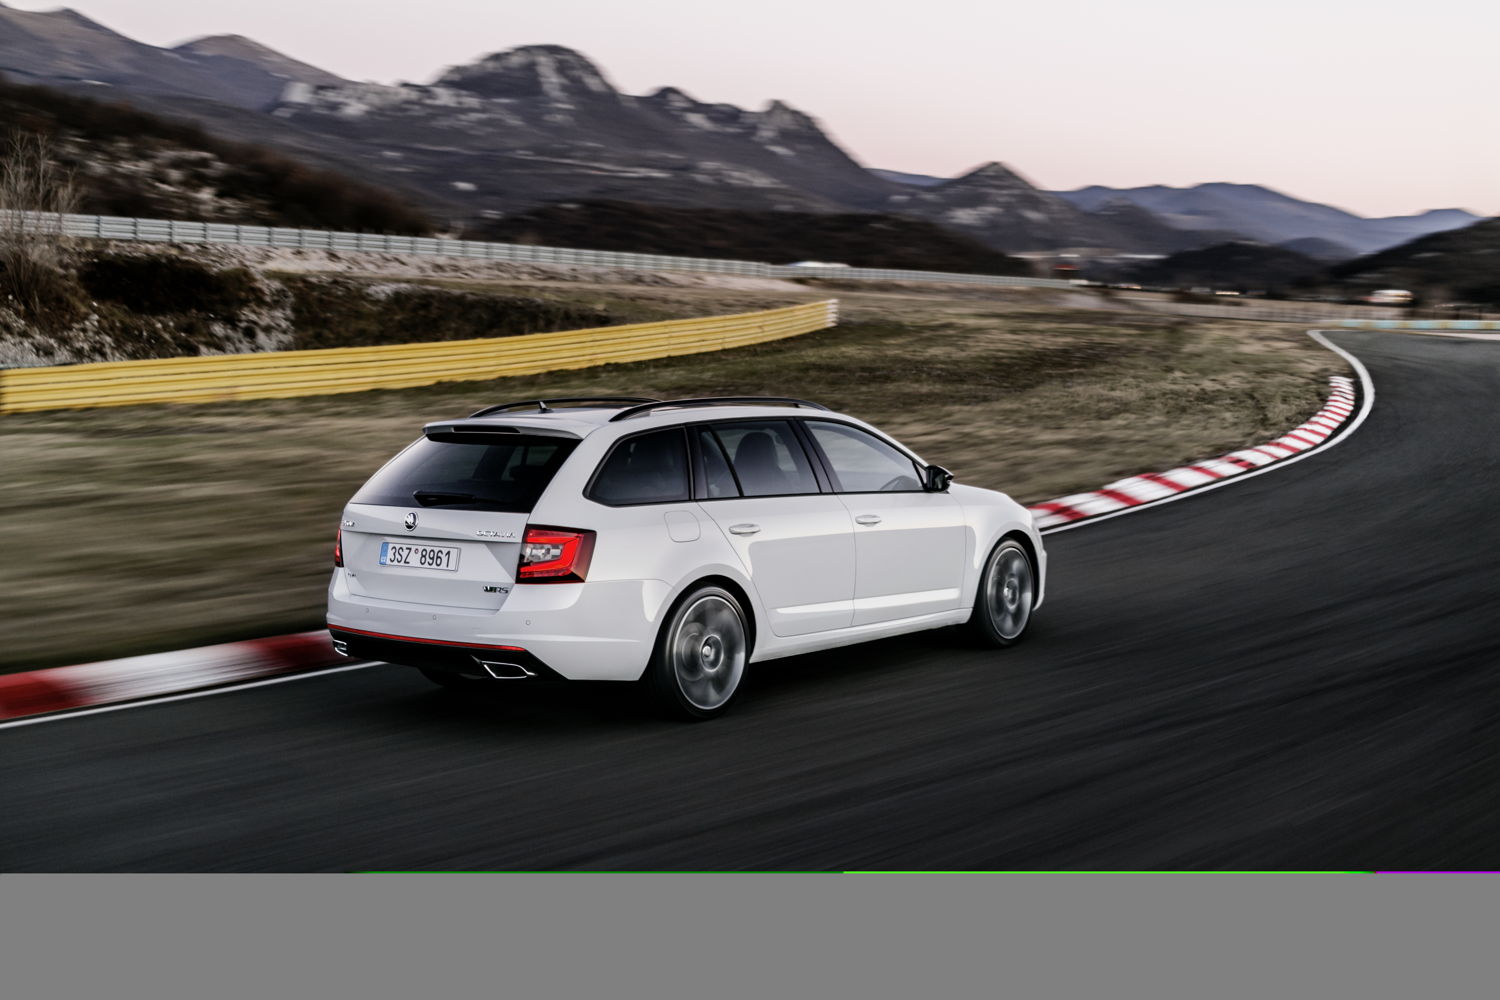 Unmistakable characteristics of the upgraded ŠKODA OCTAVIA RS is the LED-technology taillights in the classic C-design as standard. At the rear, the estate’s roof spoiler set independent accents.